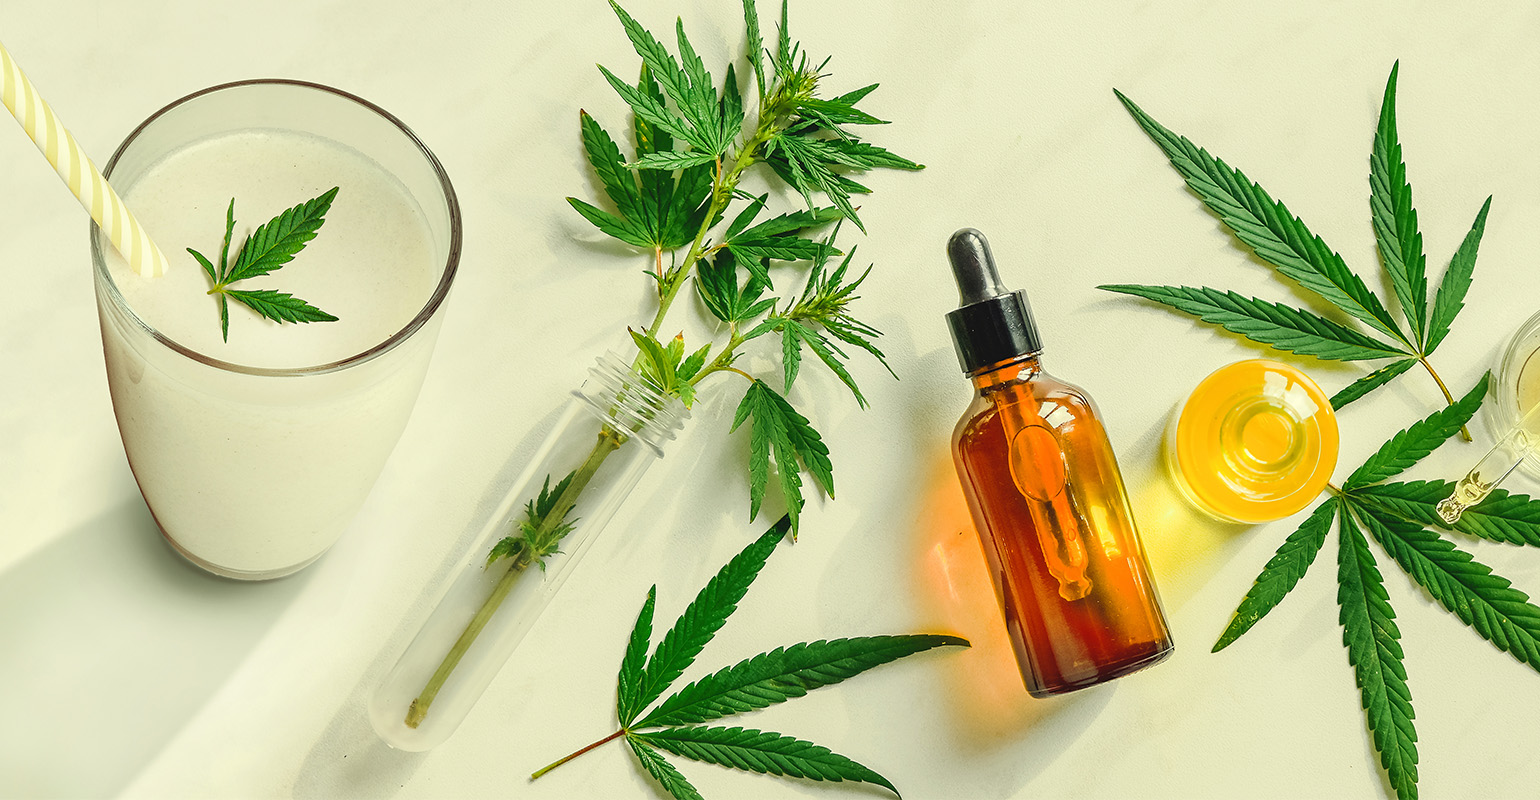 CBD Industry Booming as Consumers Look for Natural Alternatives